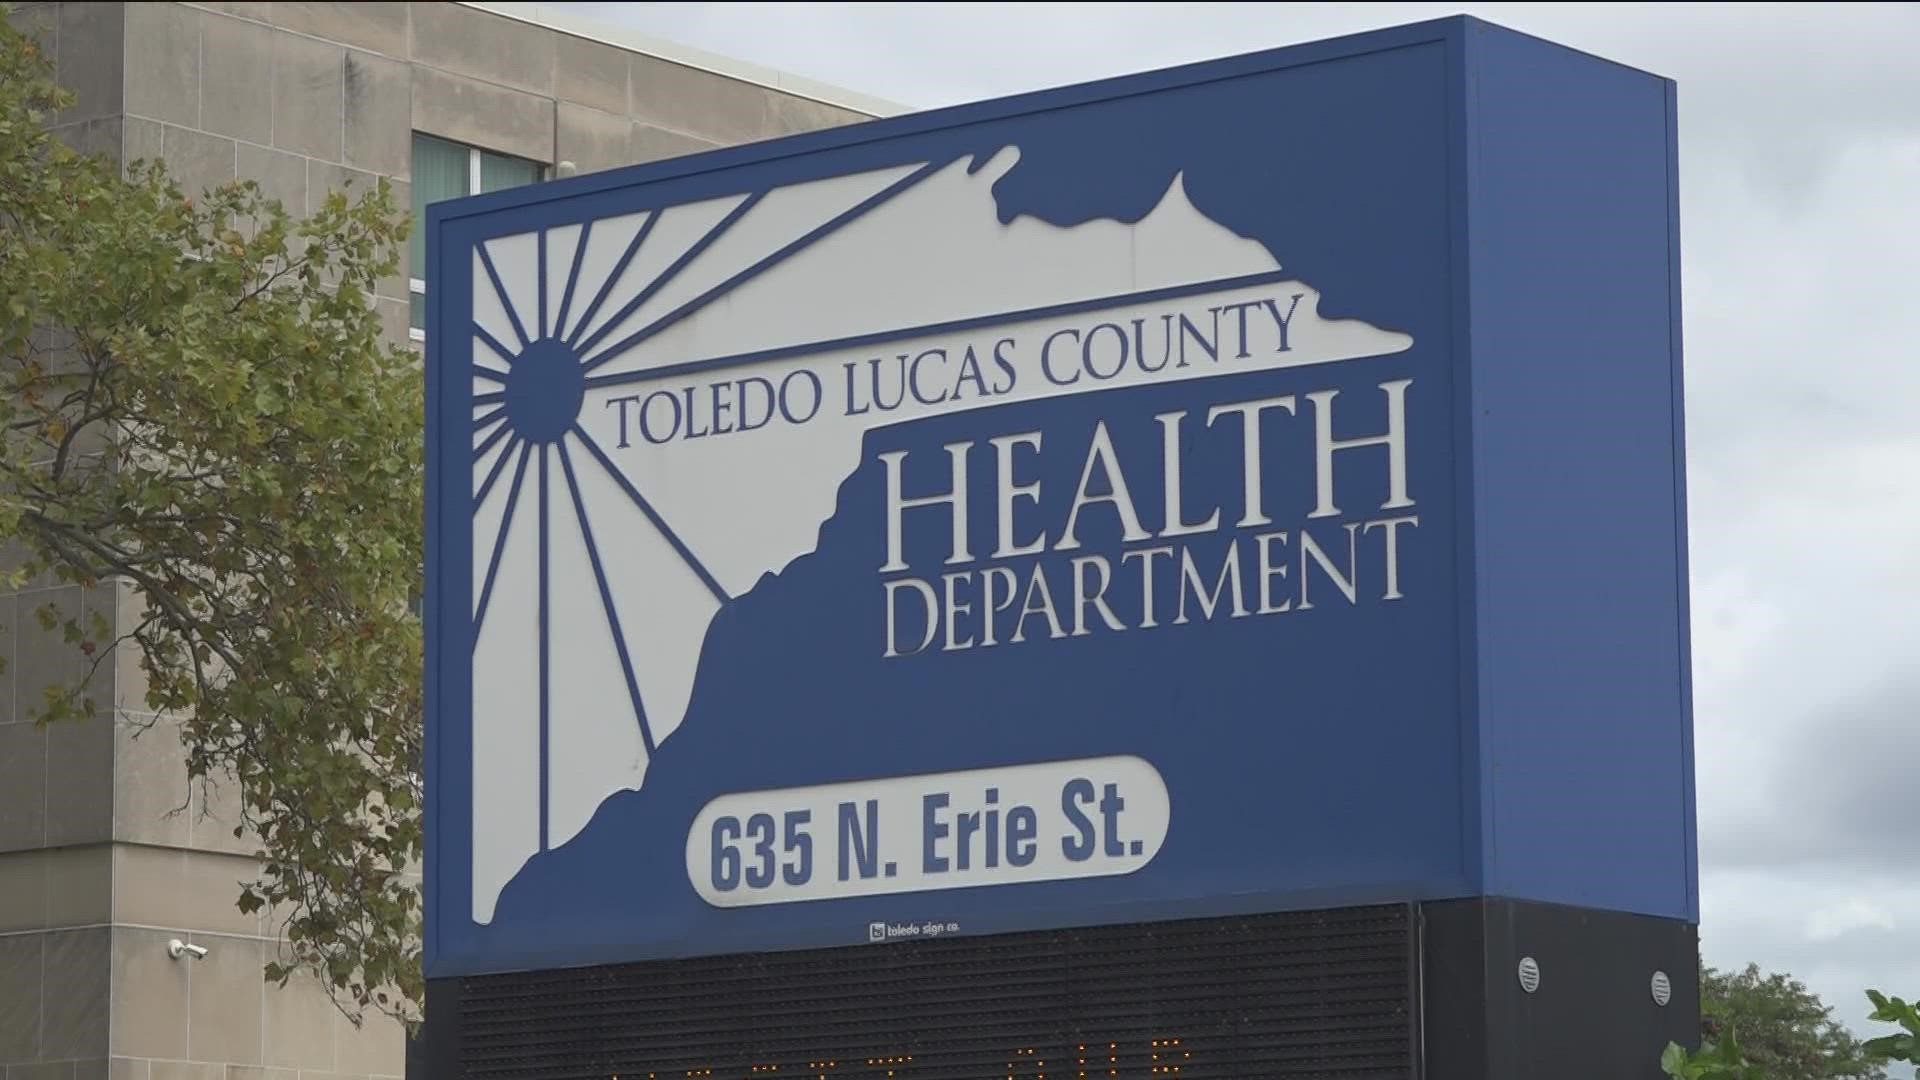 Amy Steigerwald is live from the Toledo-Lucas County Health Department to talk about what health leaders are saying about Covid-19 as we move into holiday seasons.